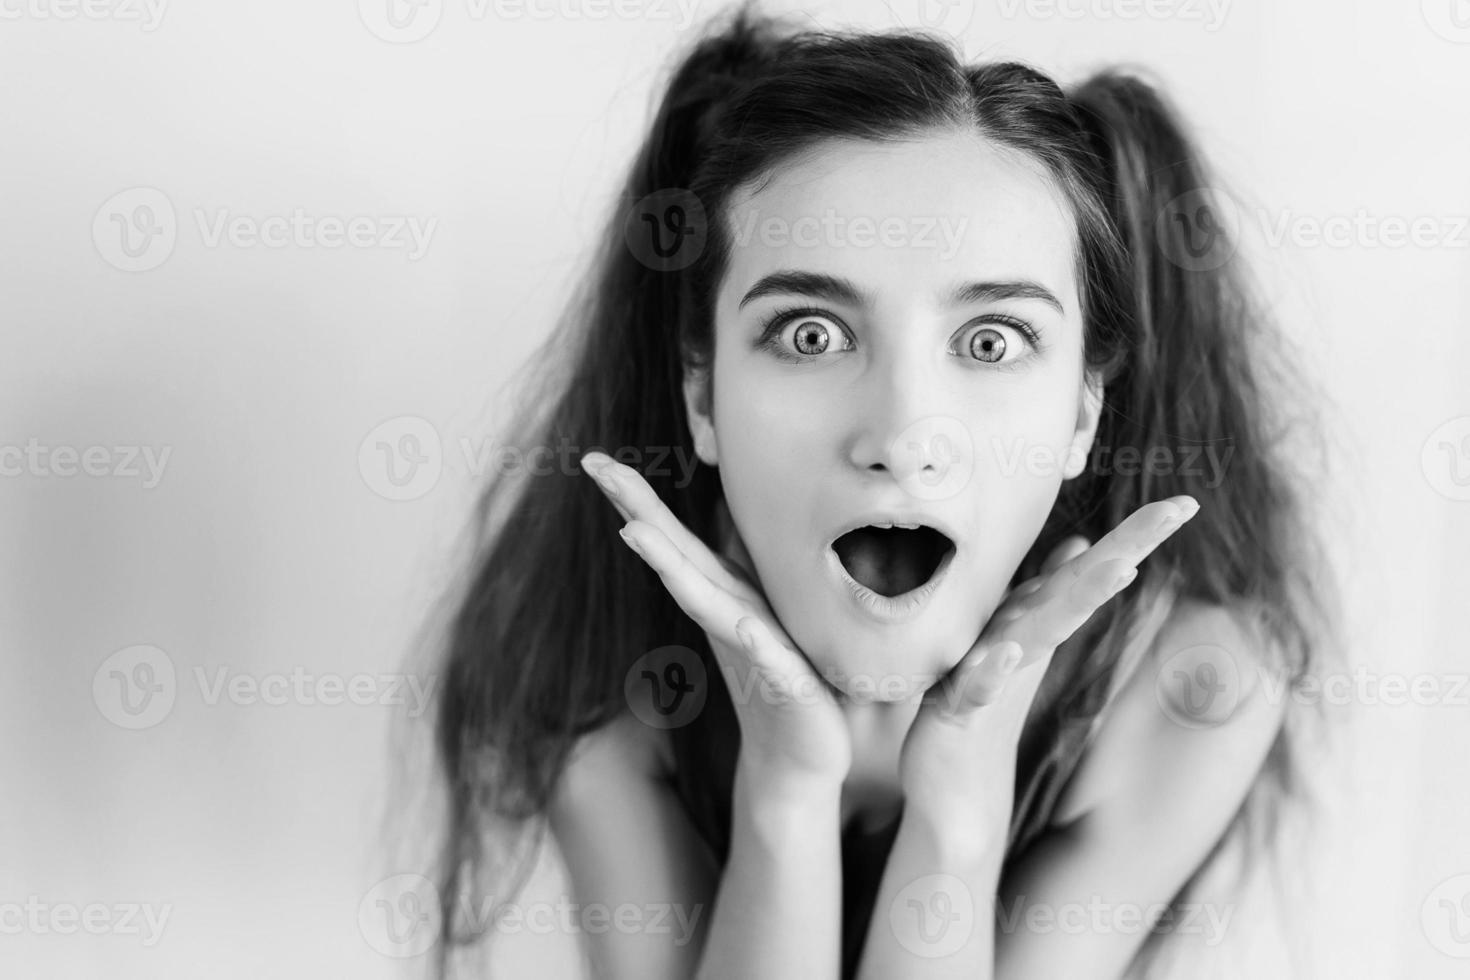 Surprised young girl with pigtails photo